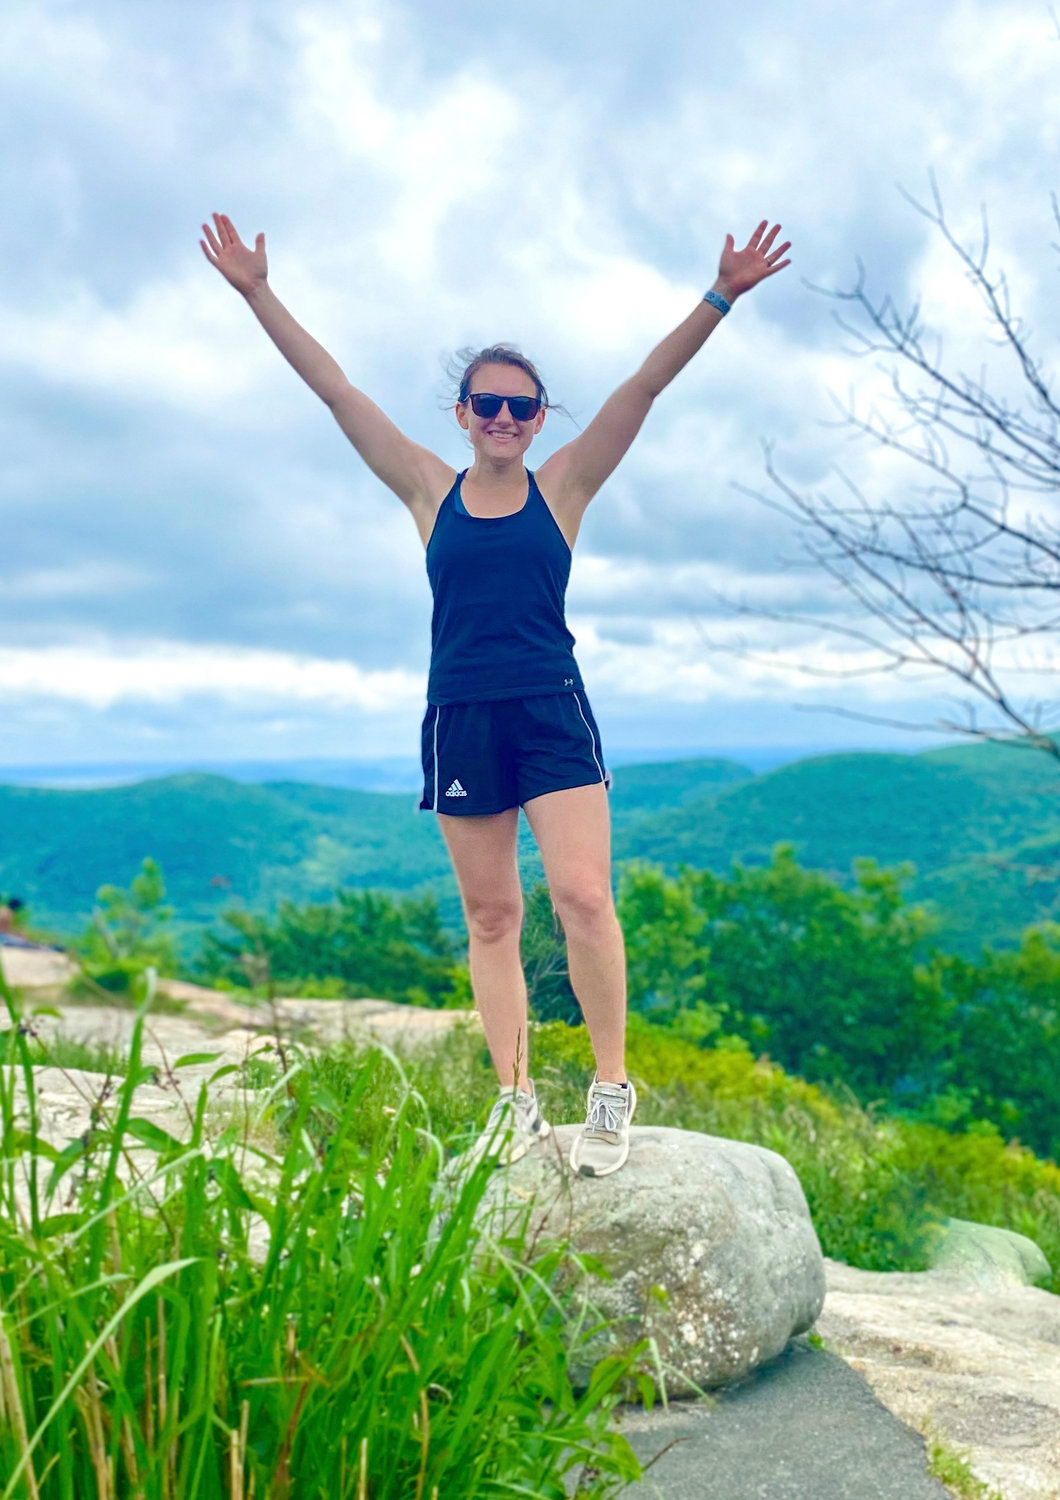 Bear Mountain, Challenging yourself can be simple, like adding more walking or hiking into your routine. There’s nothing like a new accomplishment with the byproduct of a beautiful view.